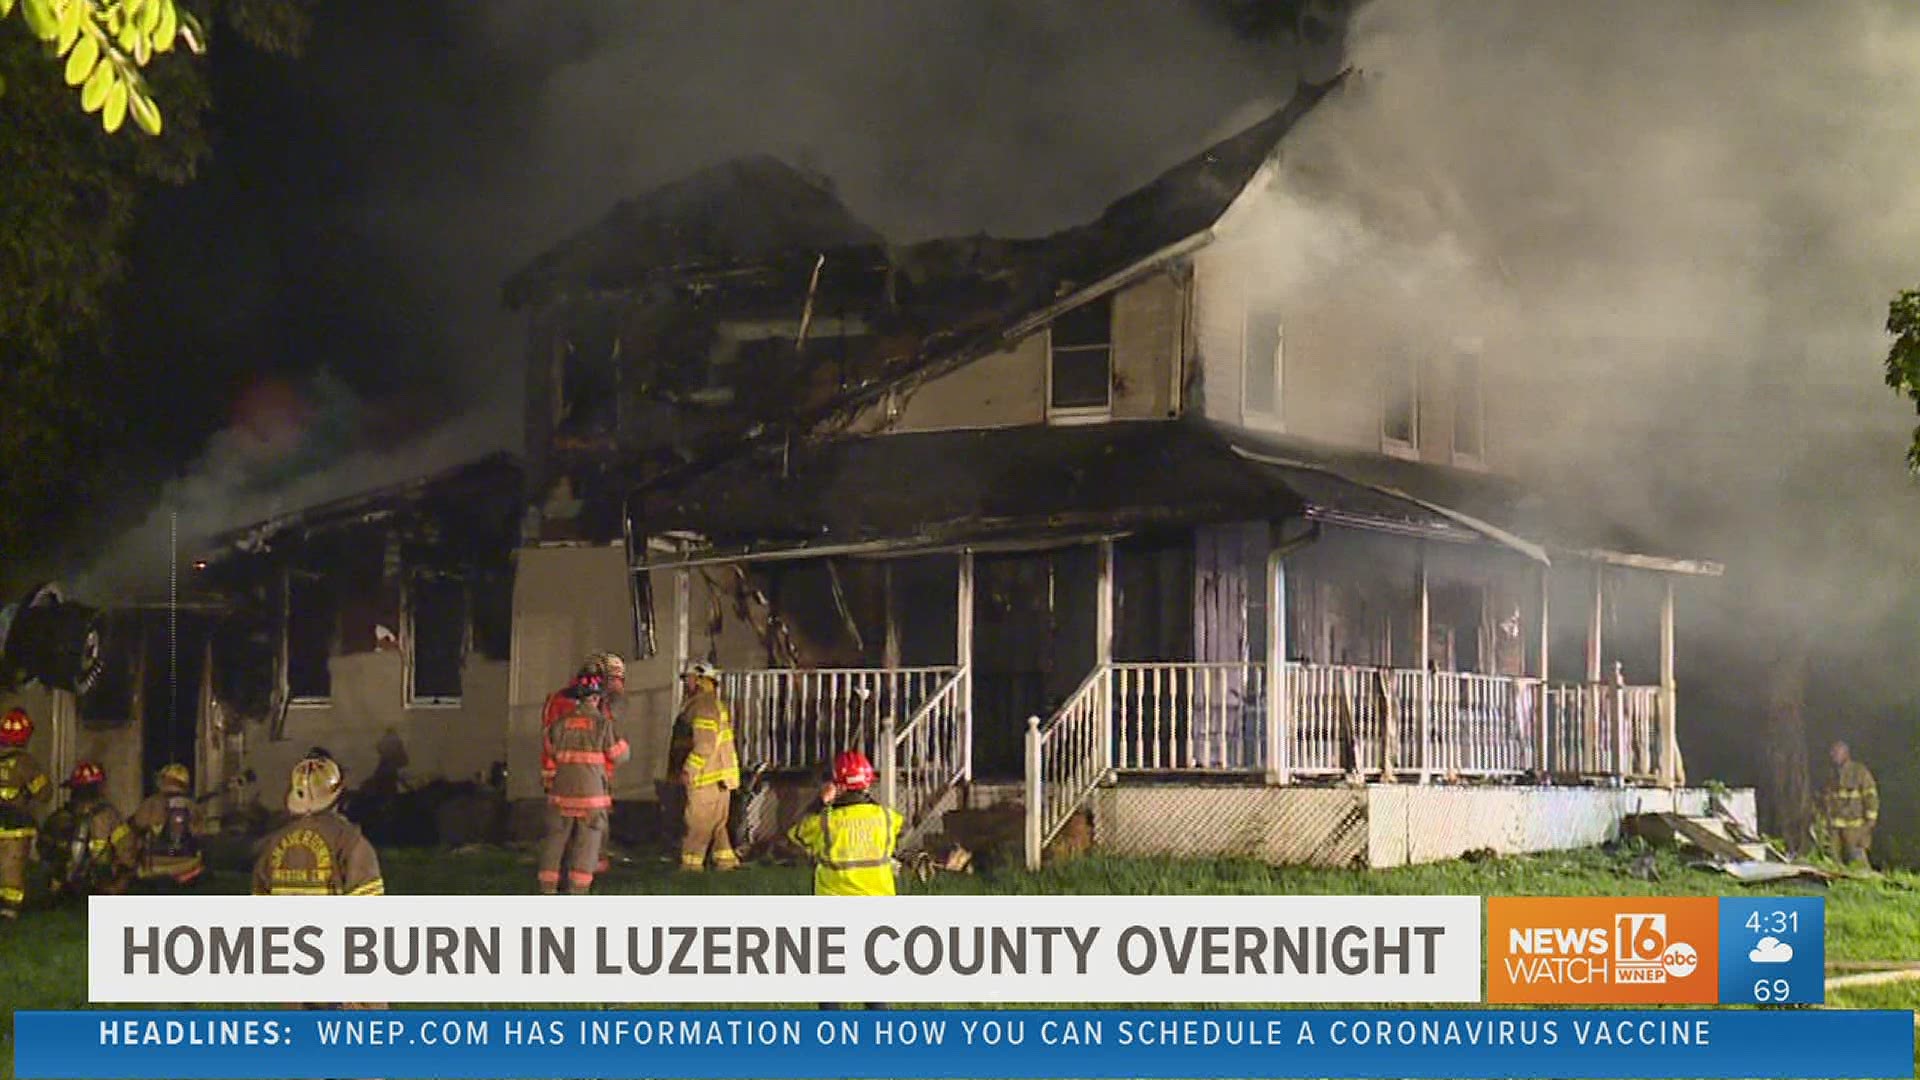 The overnight storms were blamed for one fire in Luzerne County, and it might have caused a second.